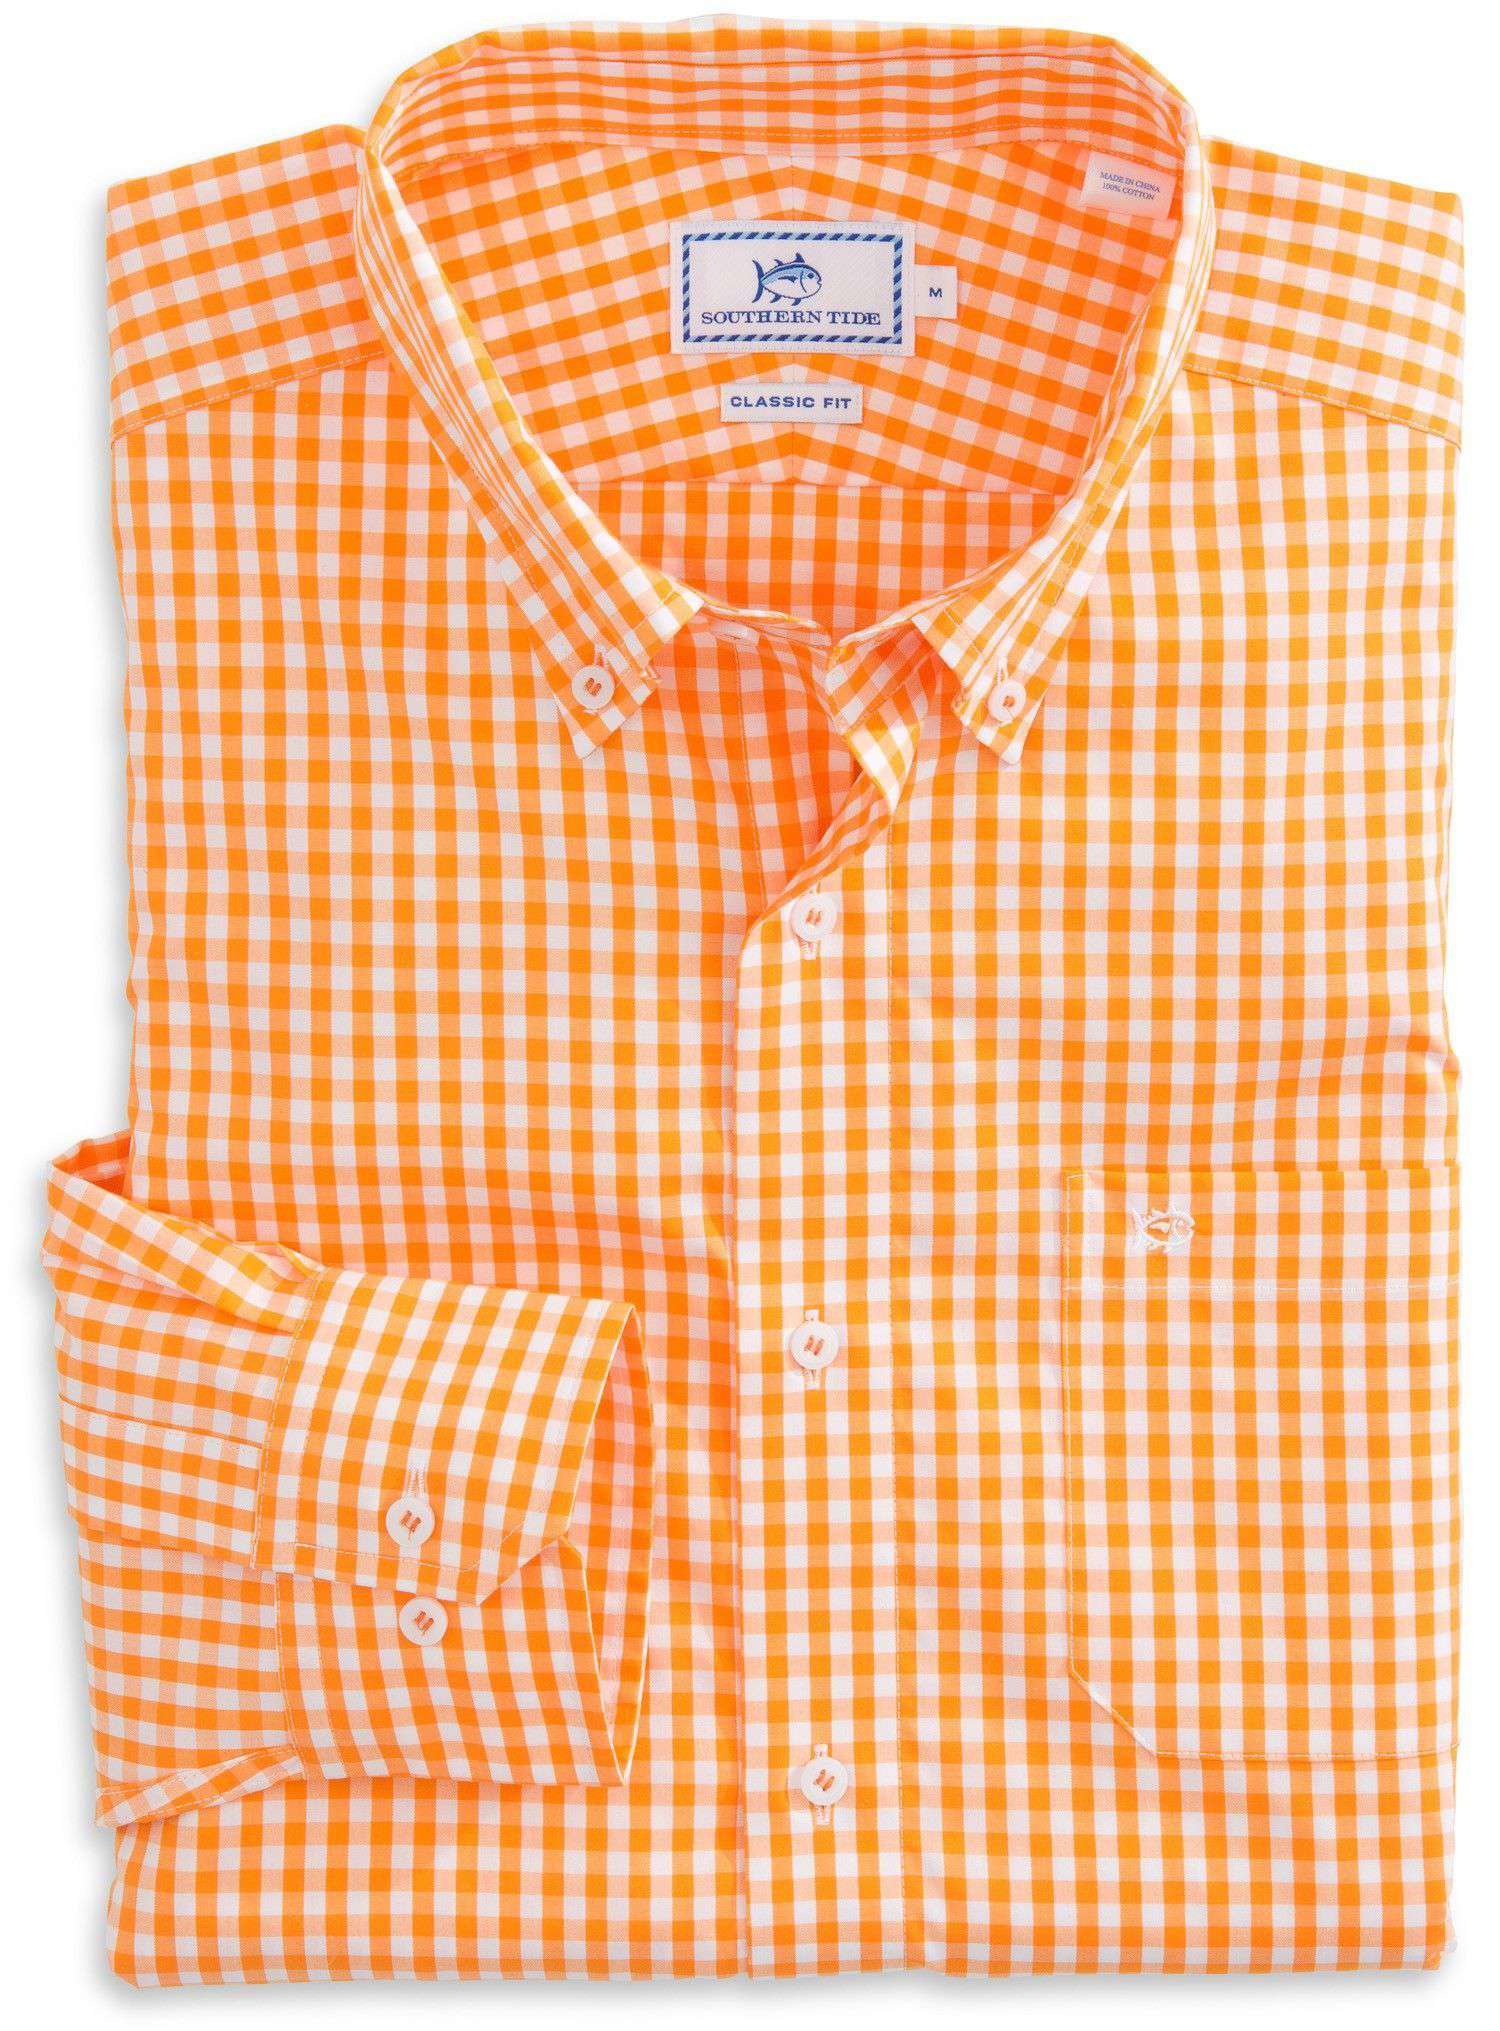 Southern Tide Team Colors Gingham Sport Shirt in Rocky Top Orange